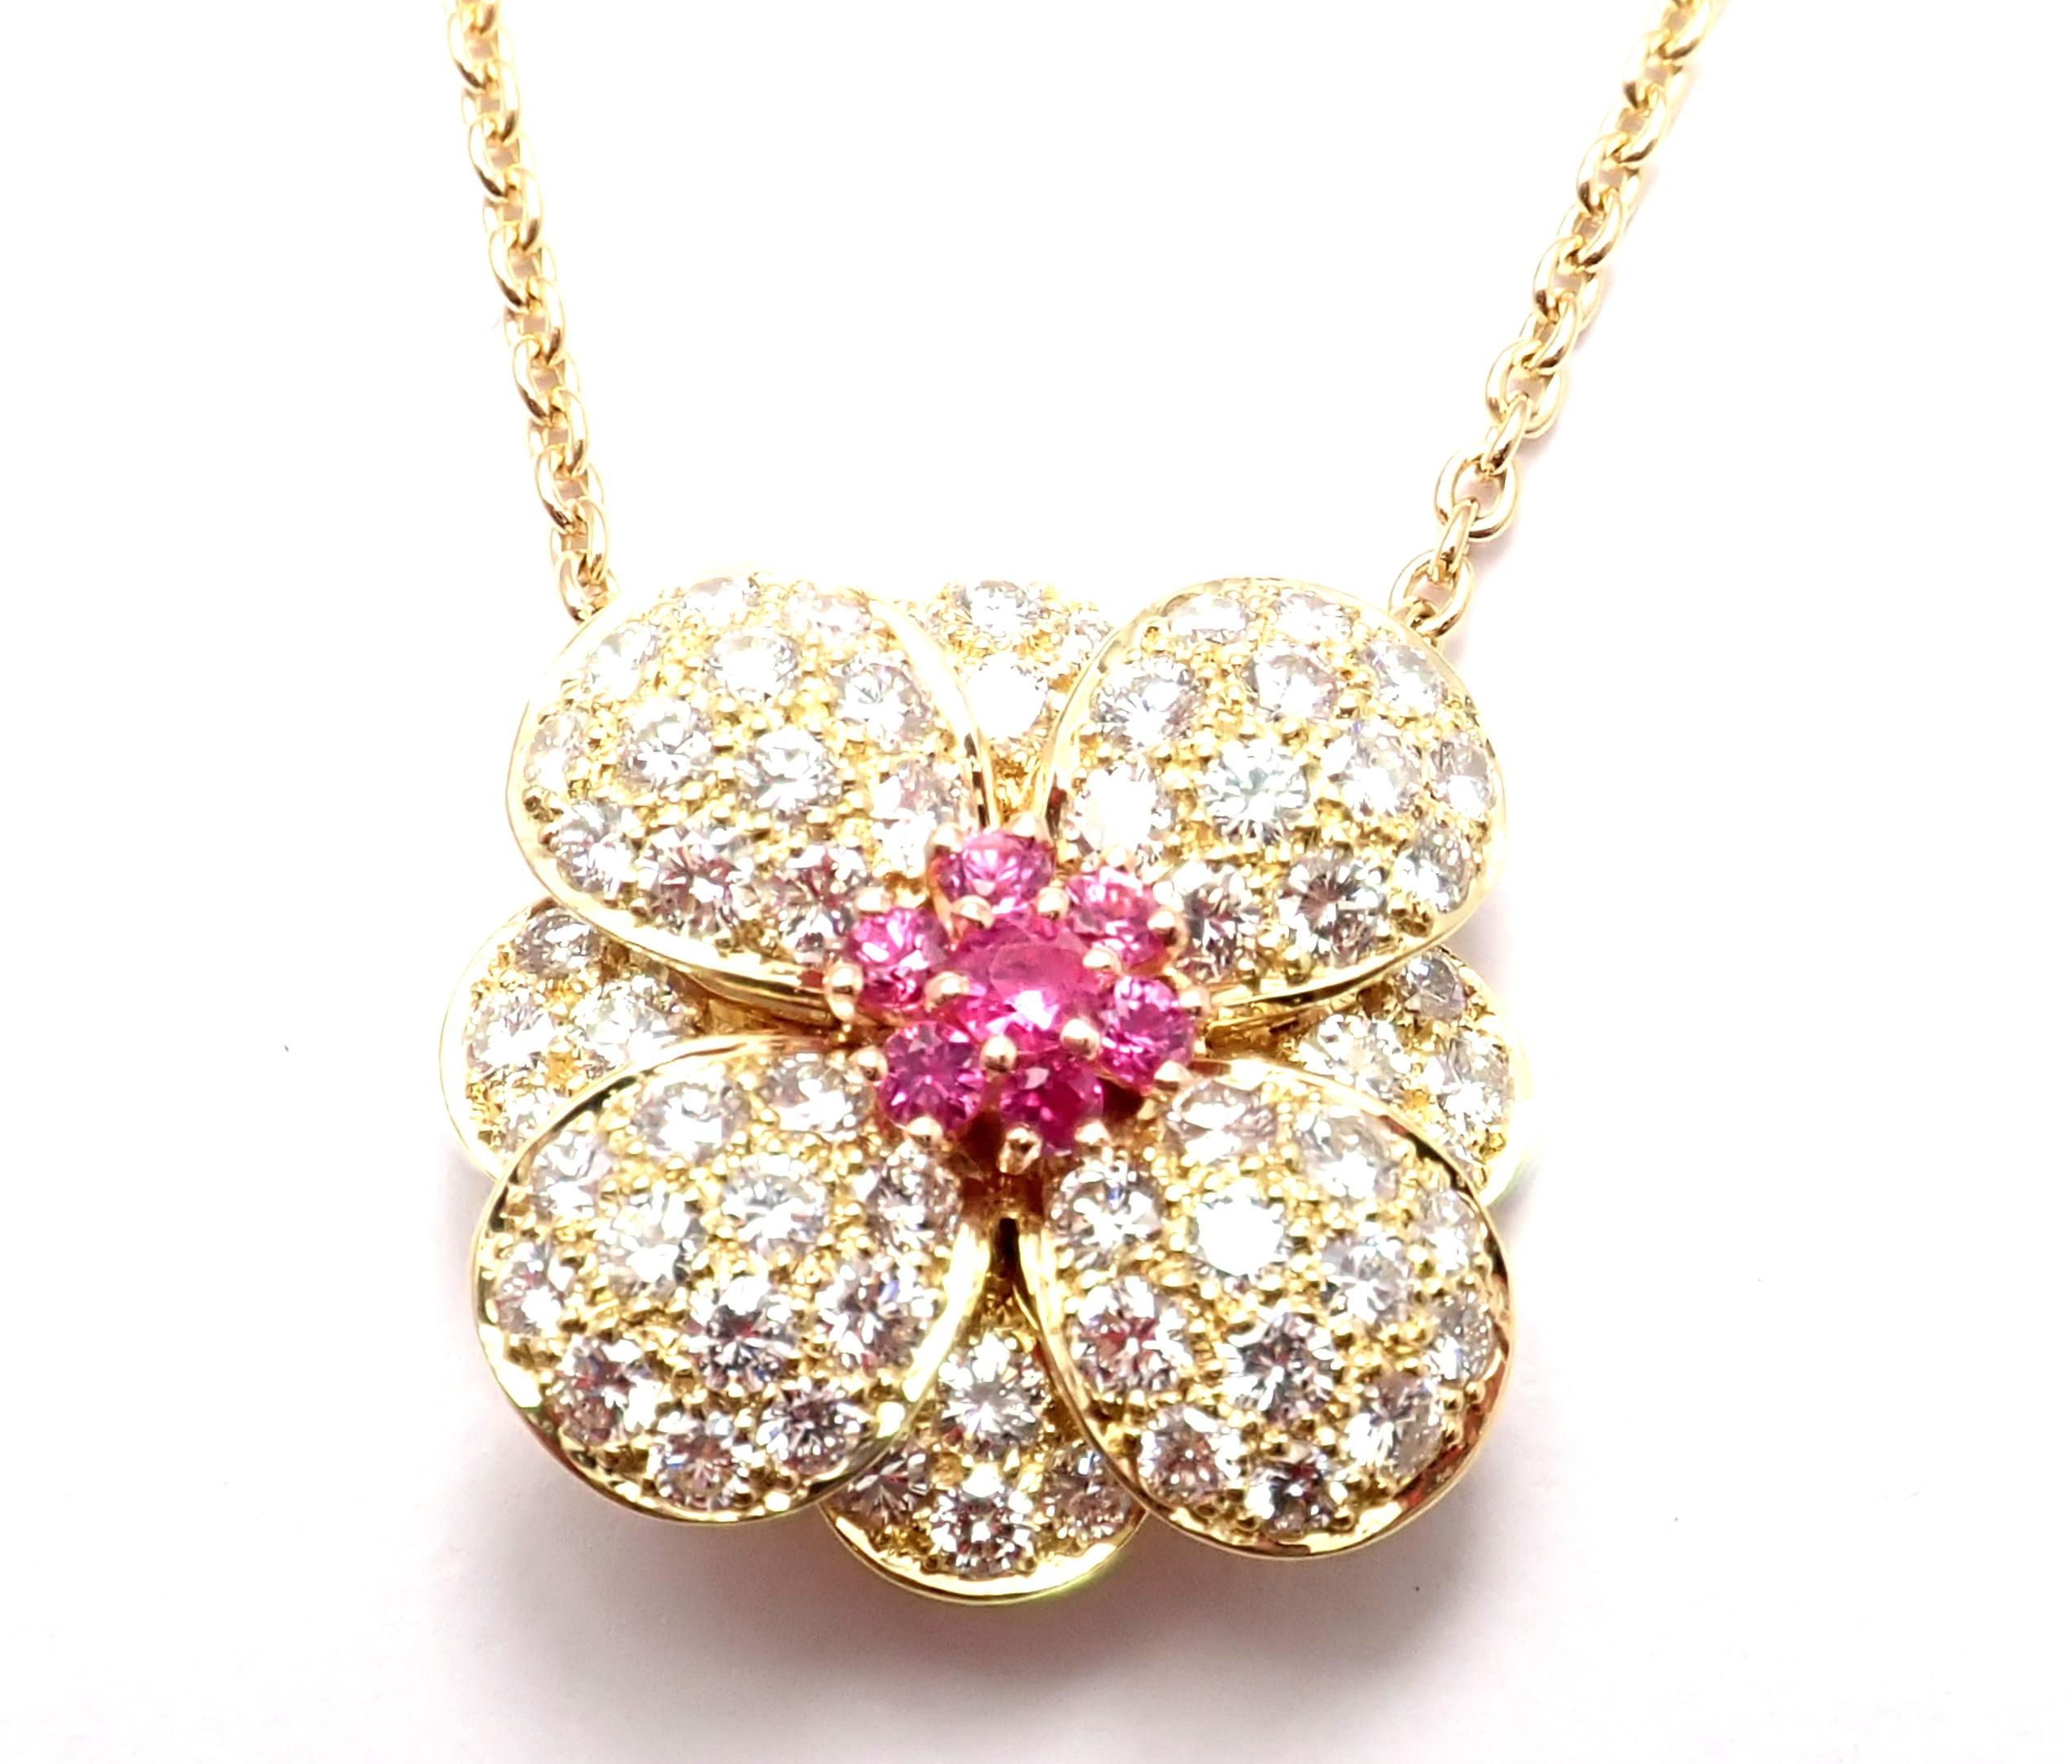 18k Yellow Gold Diamond And Pink Sapphire Flower Pendant Necklace by Van Cleef & Arpels.
With brilliant cut diamonds VVS1 clarity, E color and 7 round pink sapphires.
This necklace comes with Van Cleef & Arpels service paper.
Details:
Length: